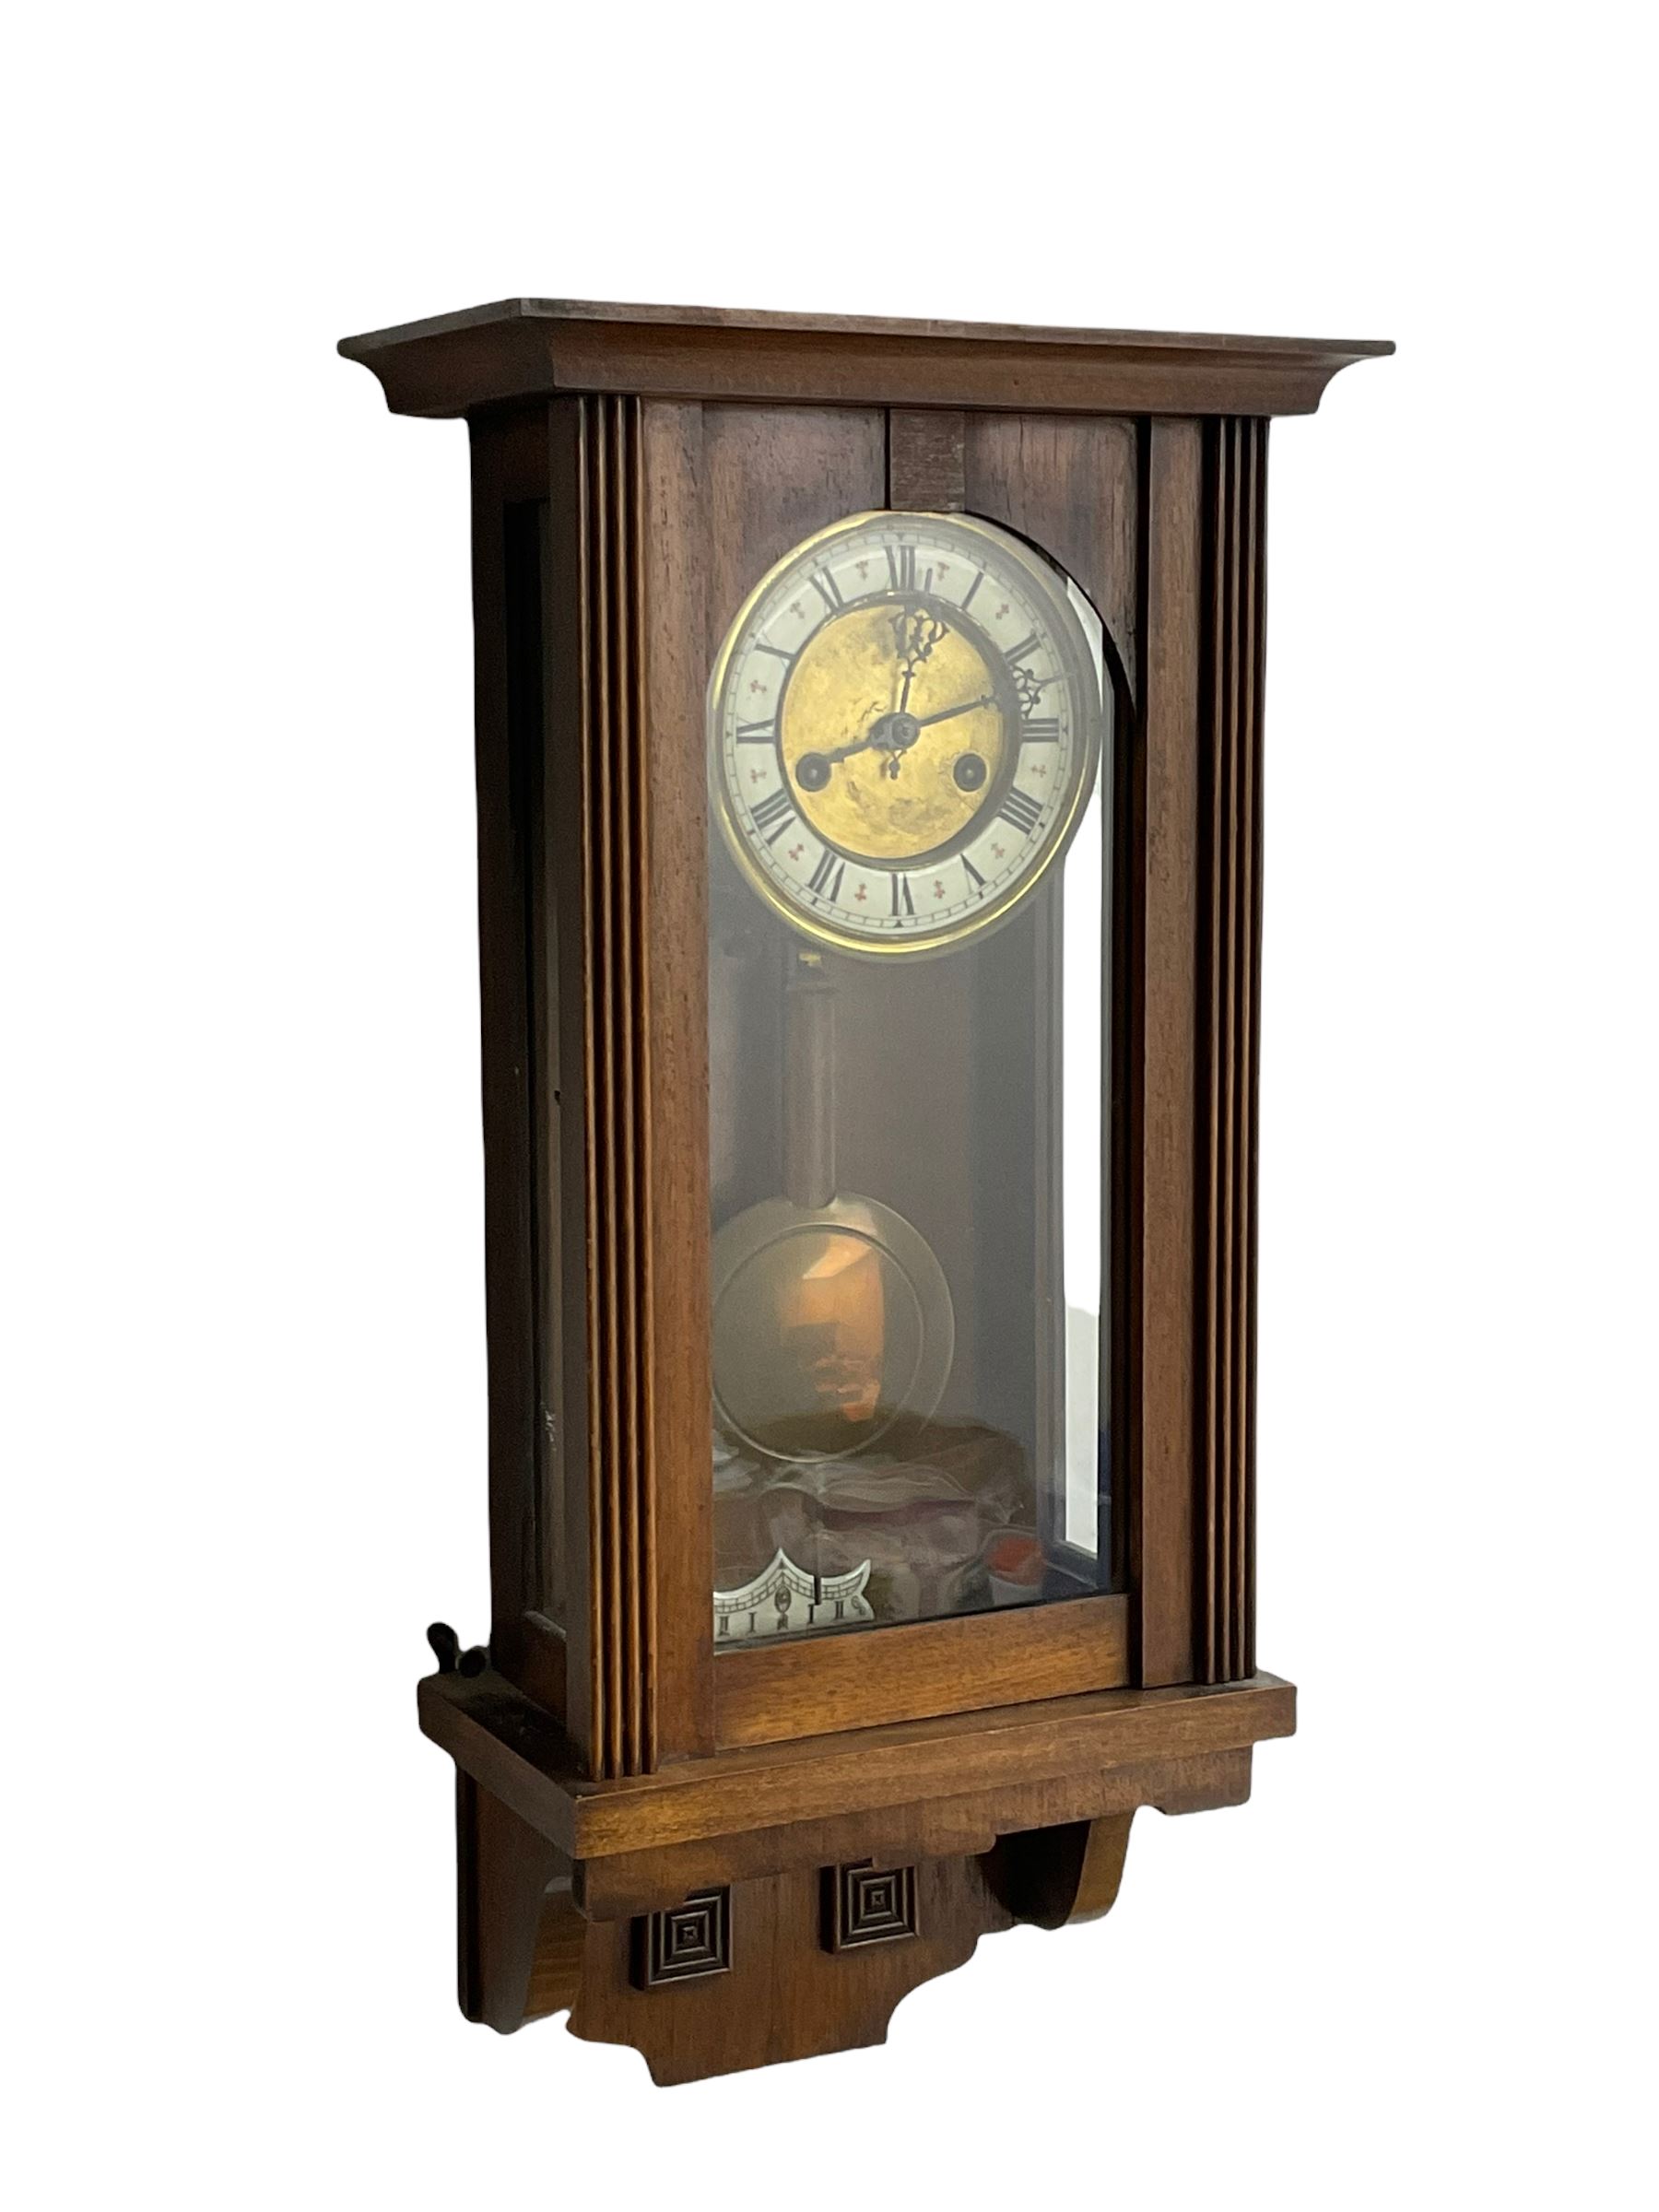 A late 19th century German spring driven wall clock in a mahogany case - Image 2 of 3